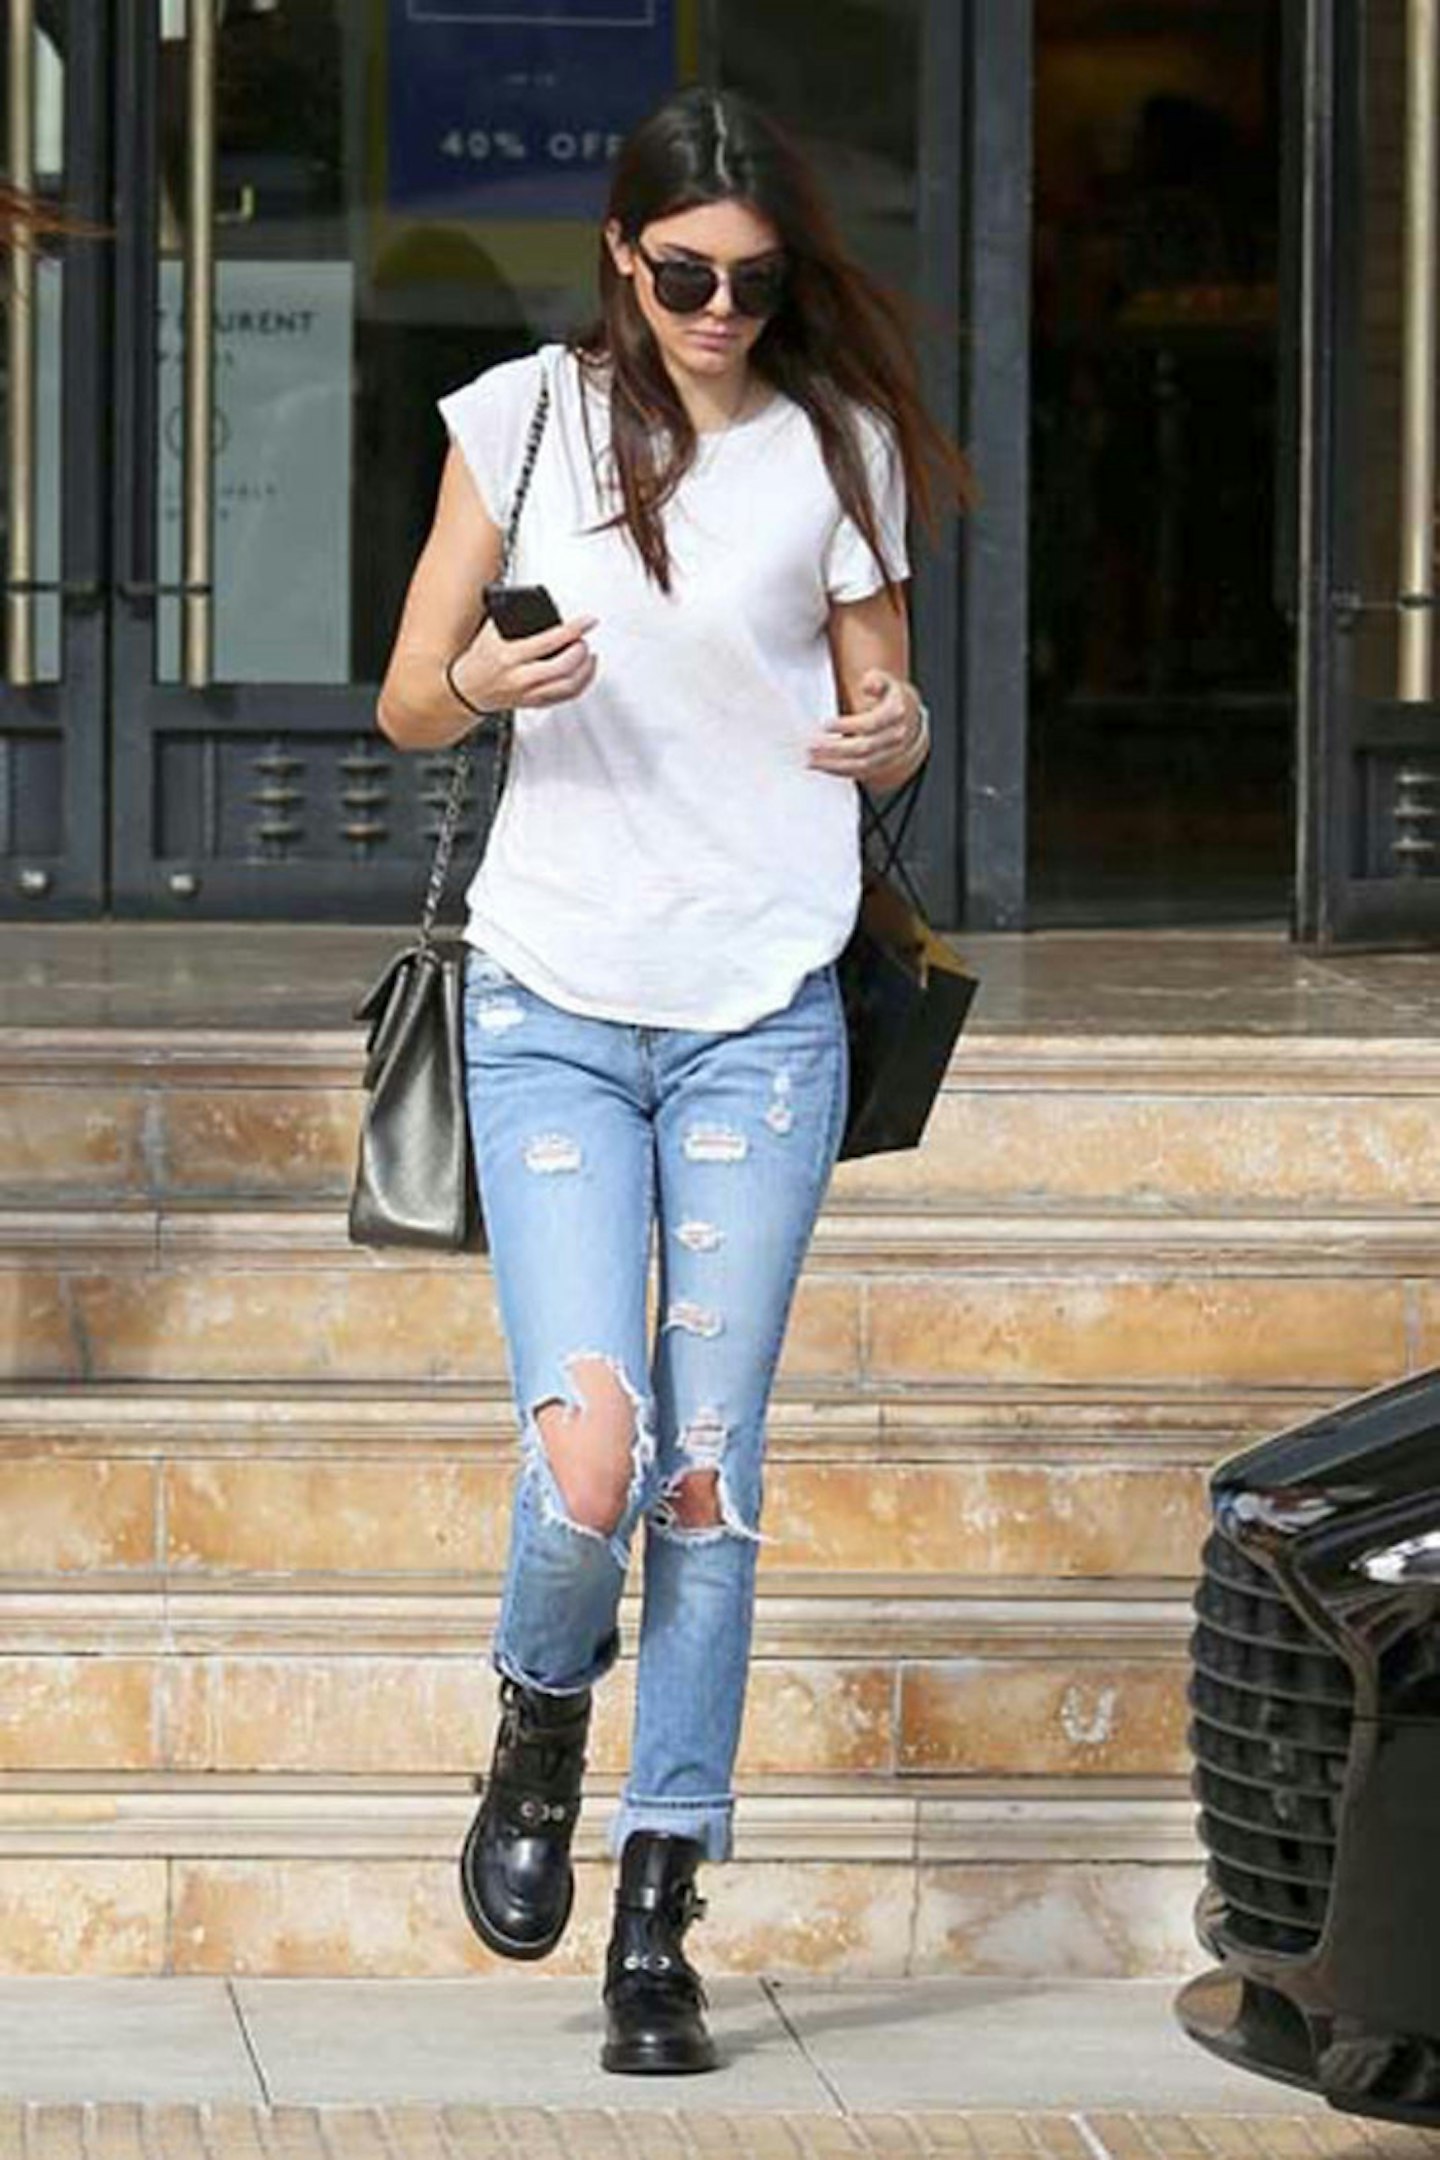 1-Kendall Jenner out and about in Los Angeles - 18 December 2013